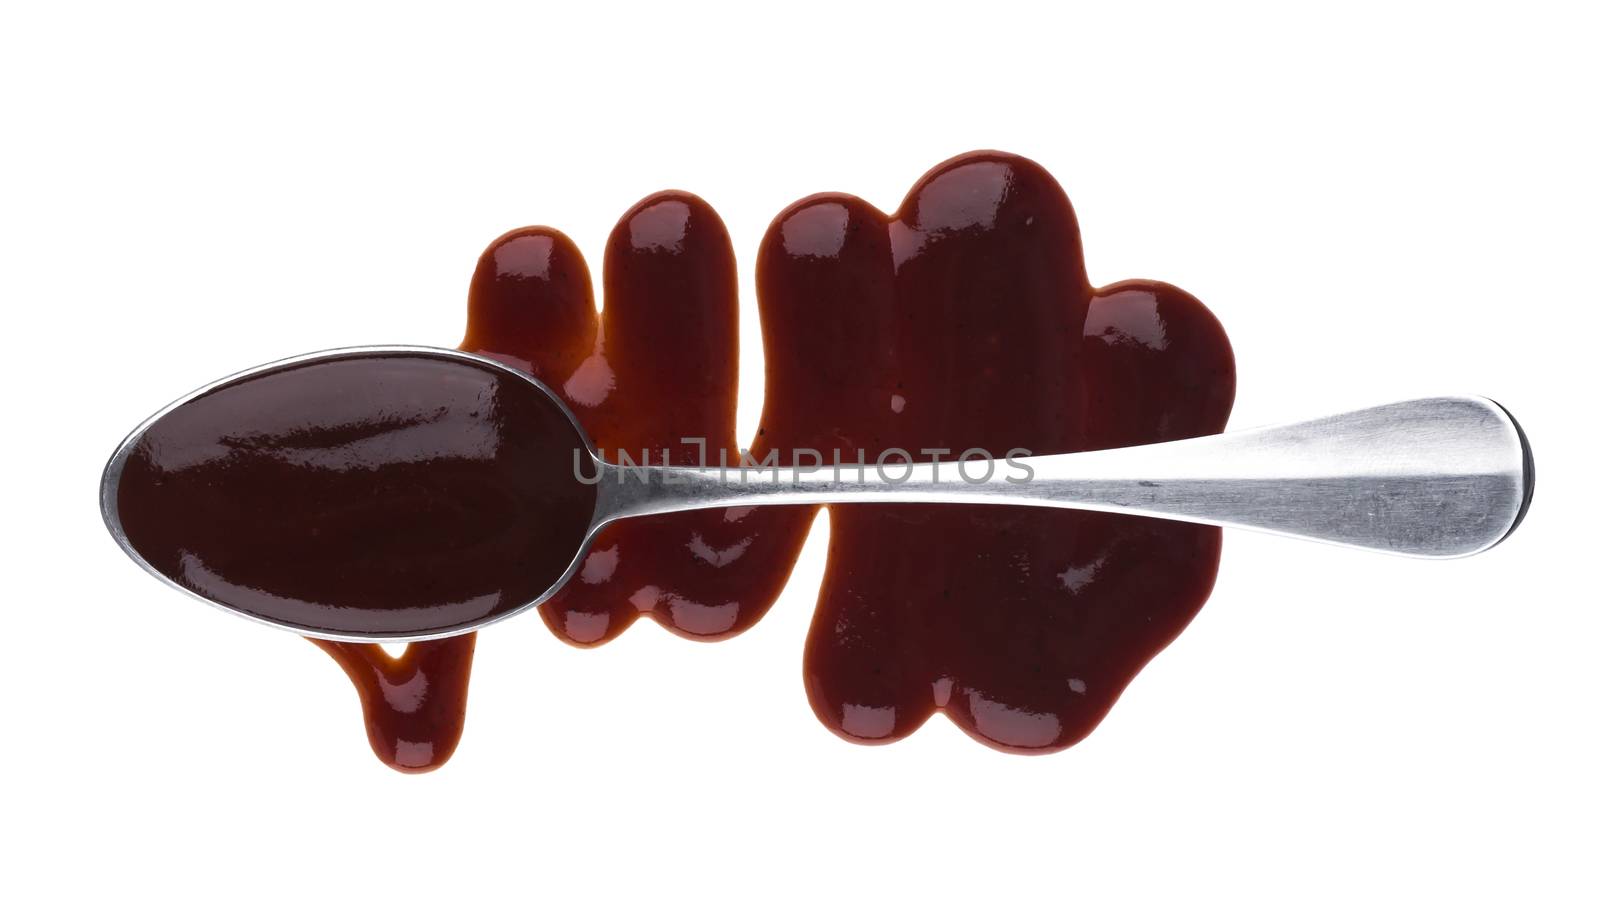 Barbecue sauce. Splashes and spilled grill sauce with spoon isolated on white background with clipping path. Top view